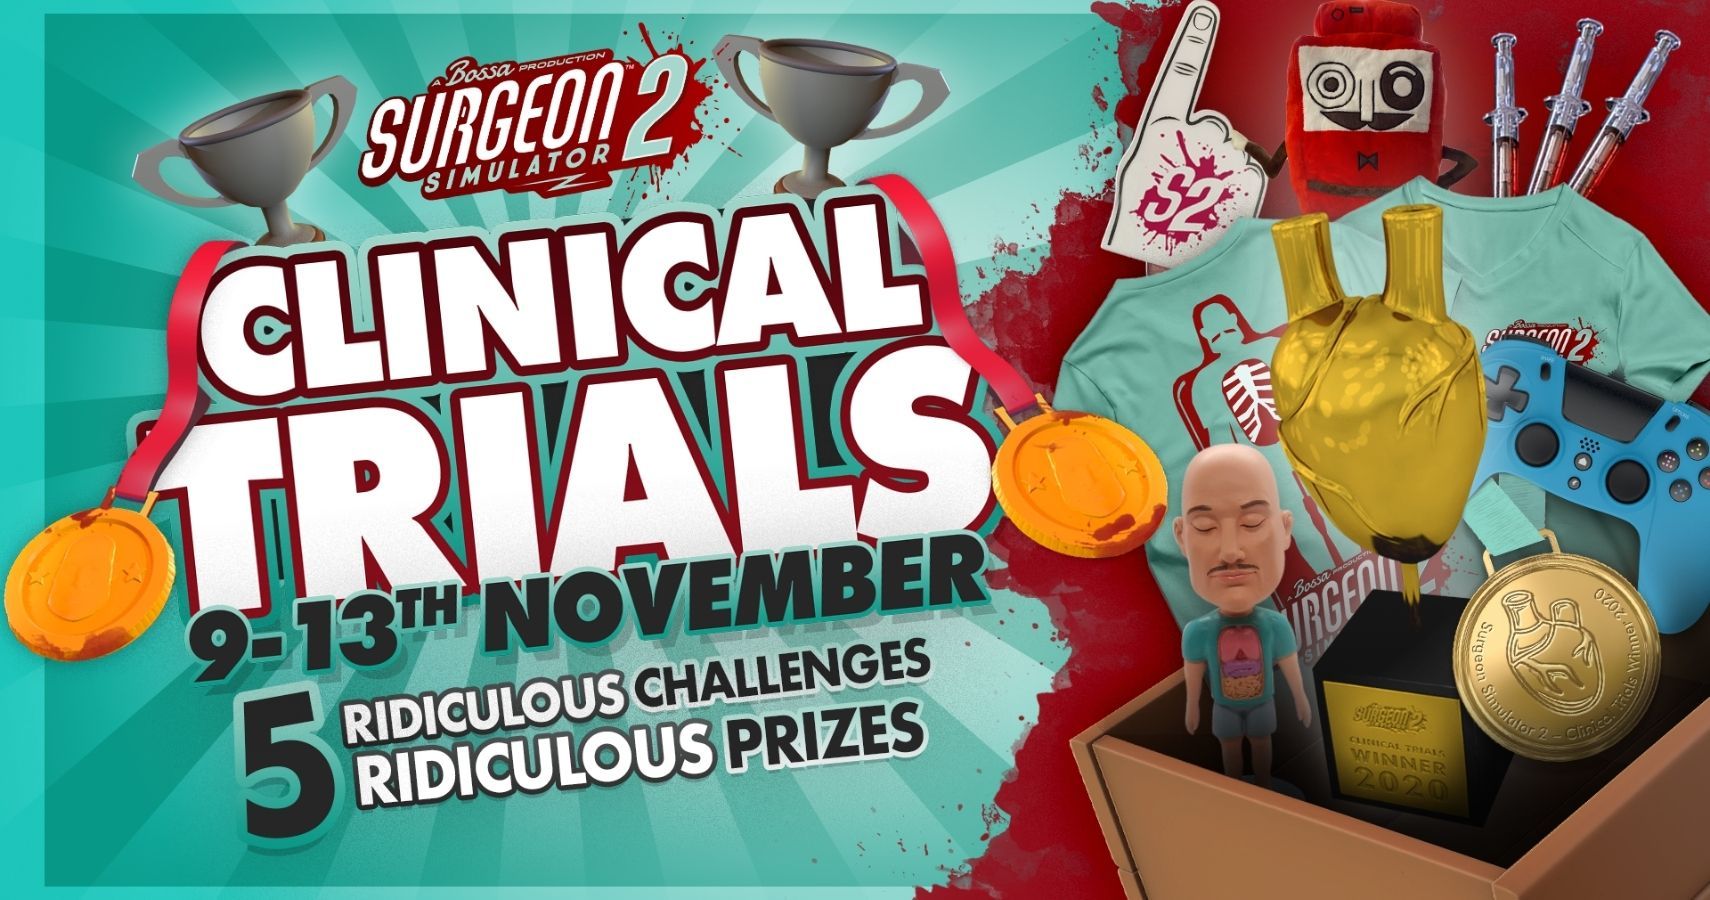 Surgeon Simulator 2 Clinical Trials Update feature image